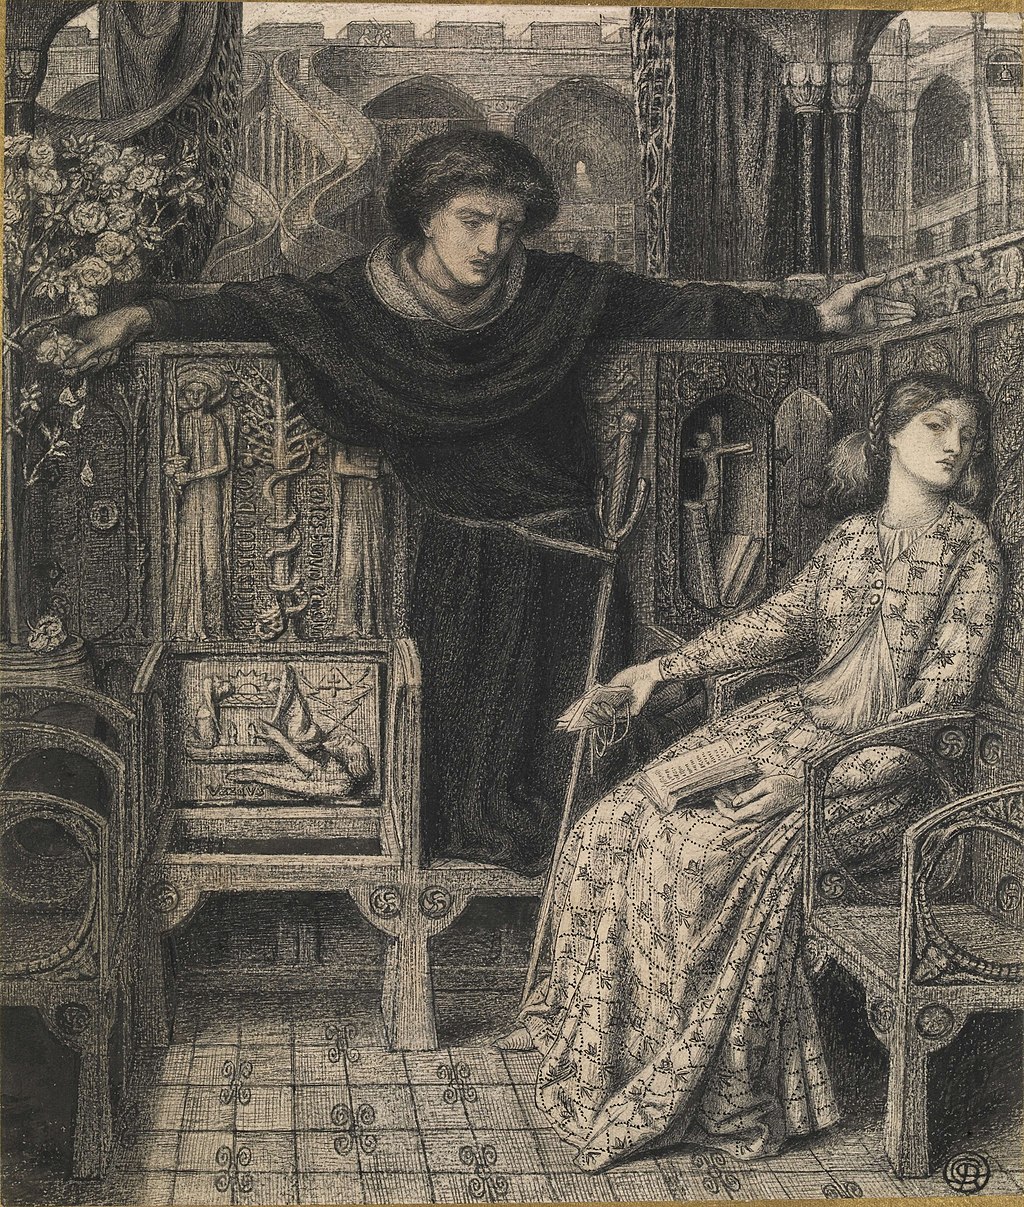 A Drawing of Hamlet Confronting Ophelia